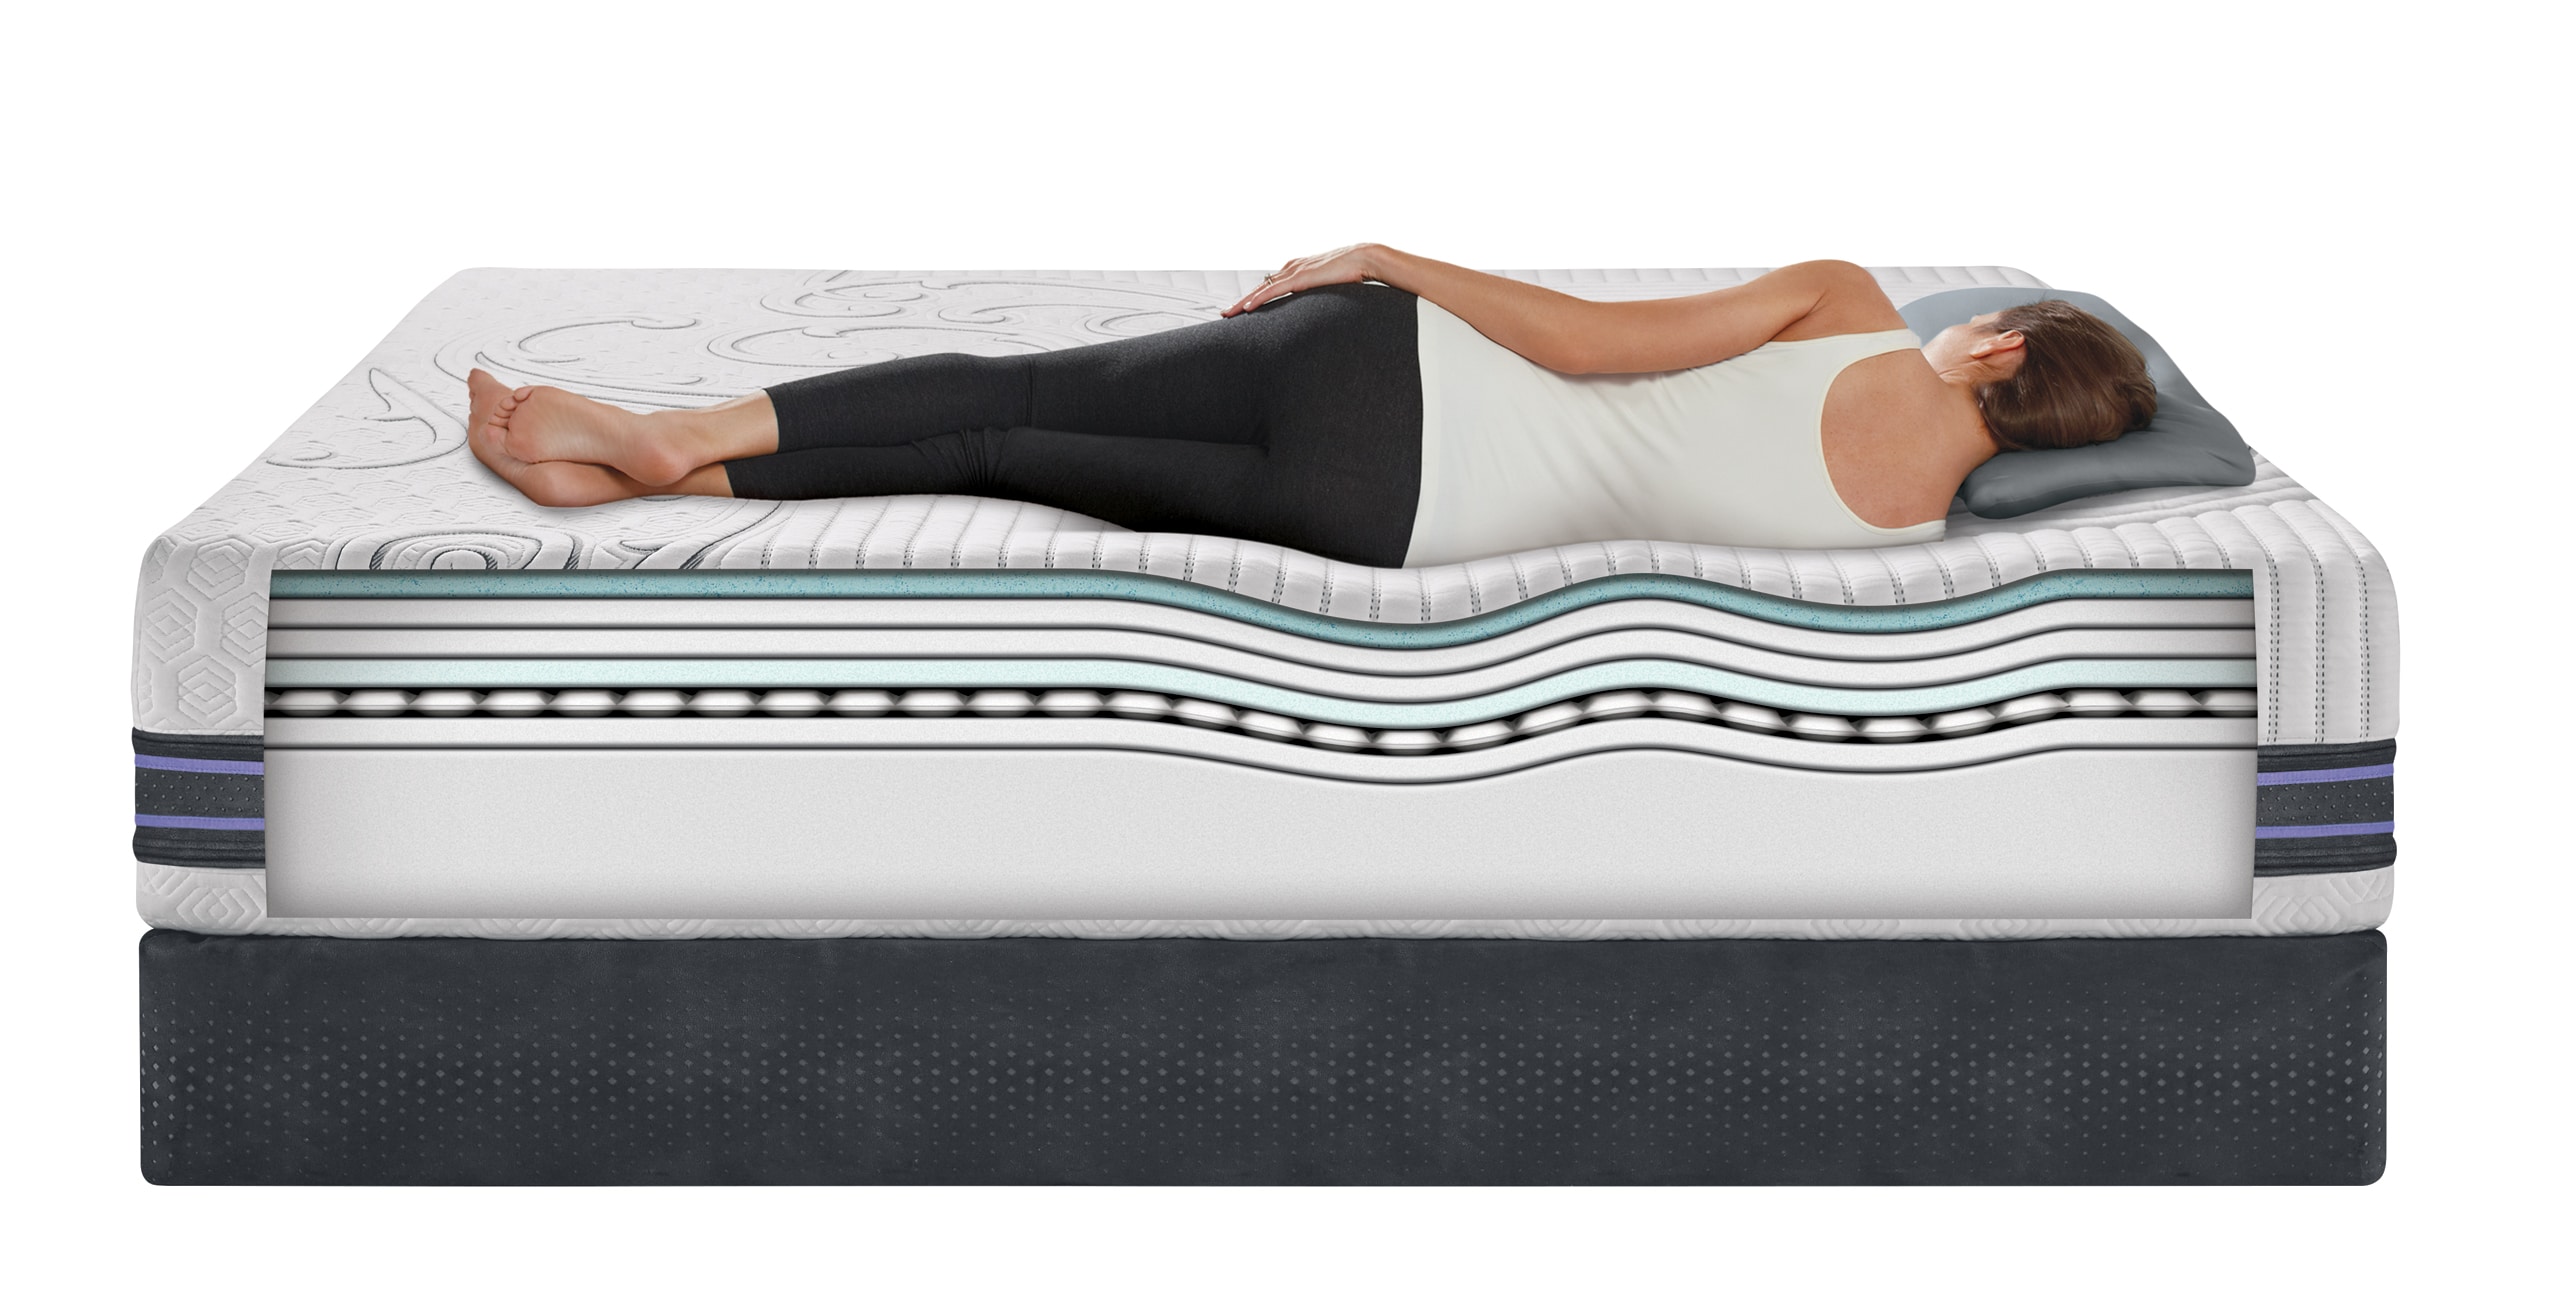 The memory foam by Serta is in the iComfort collection